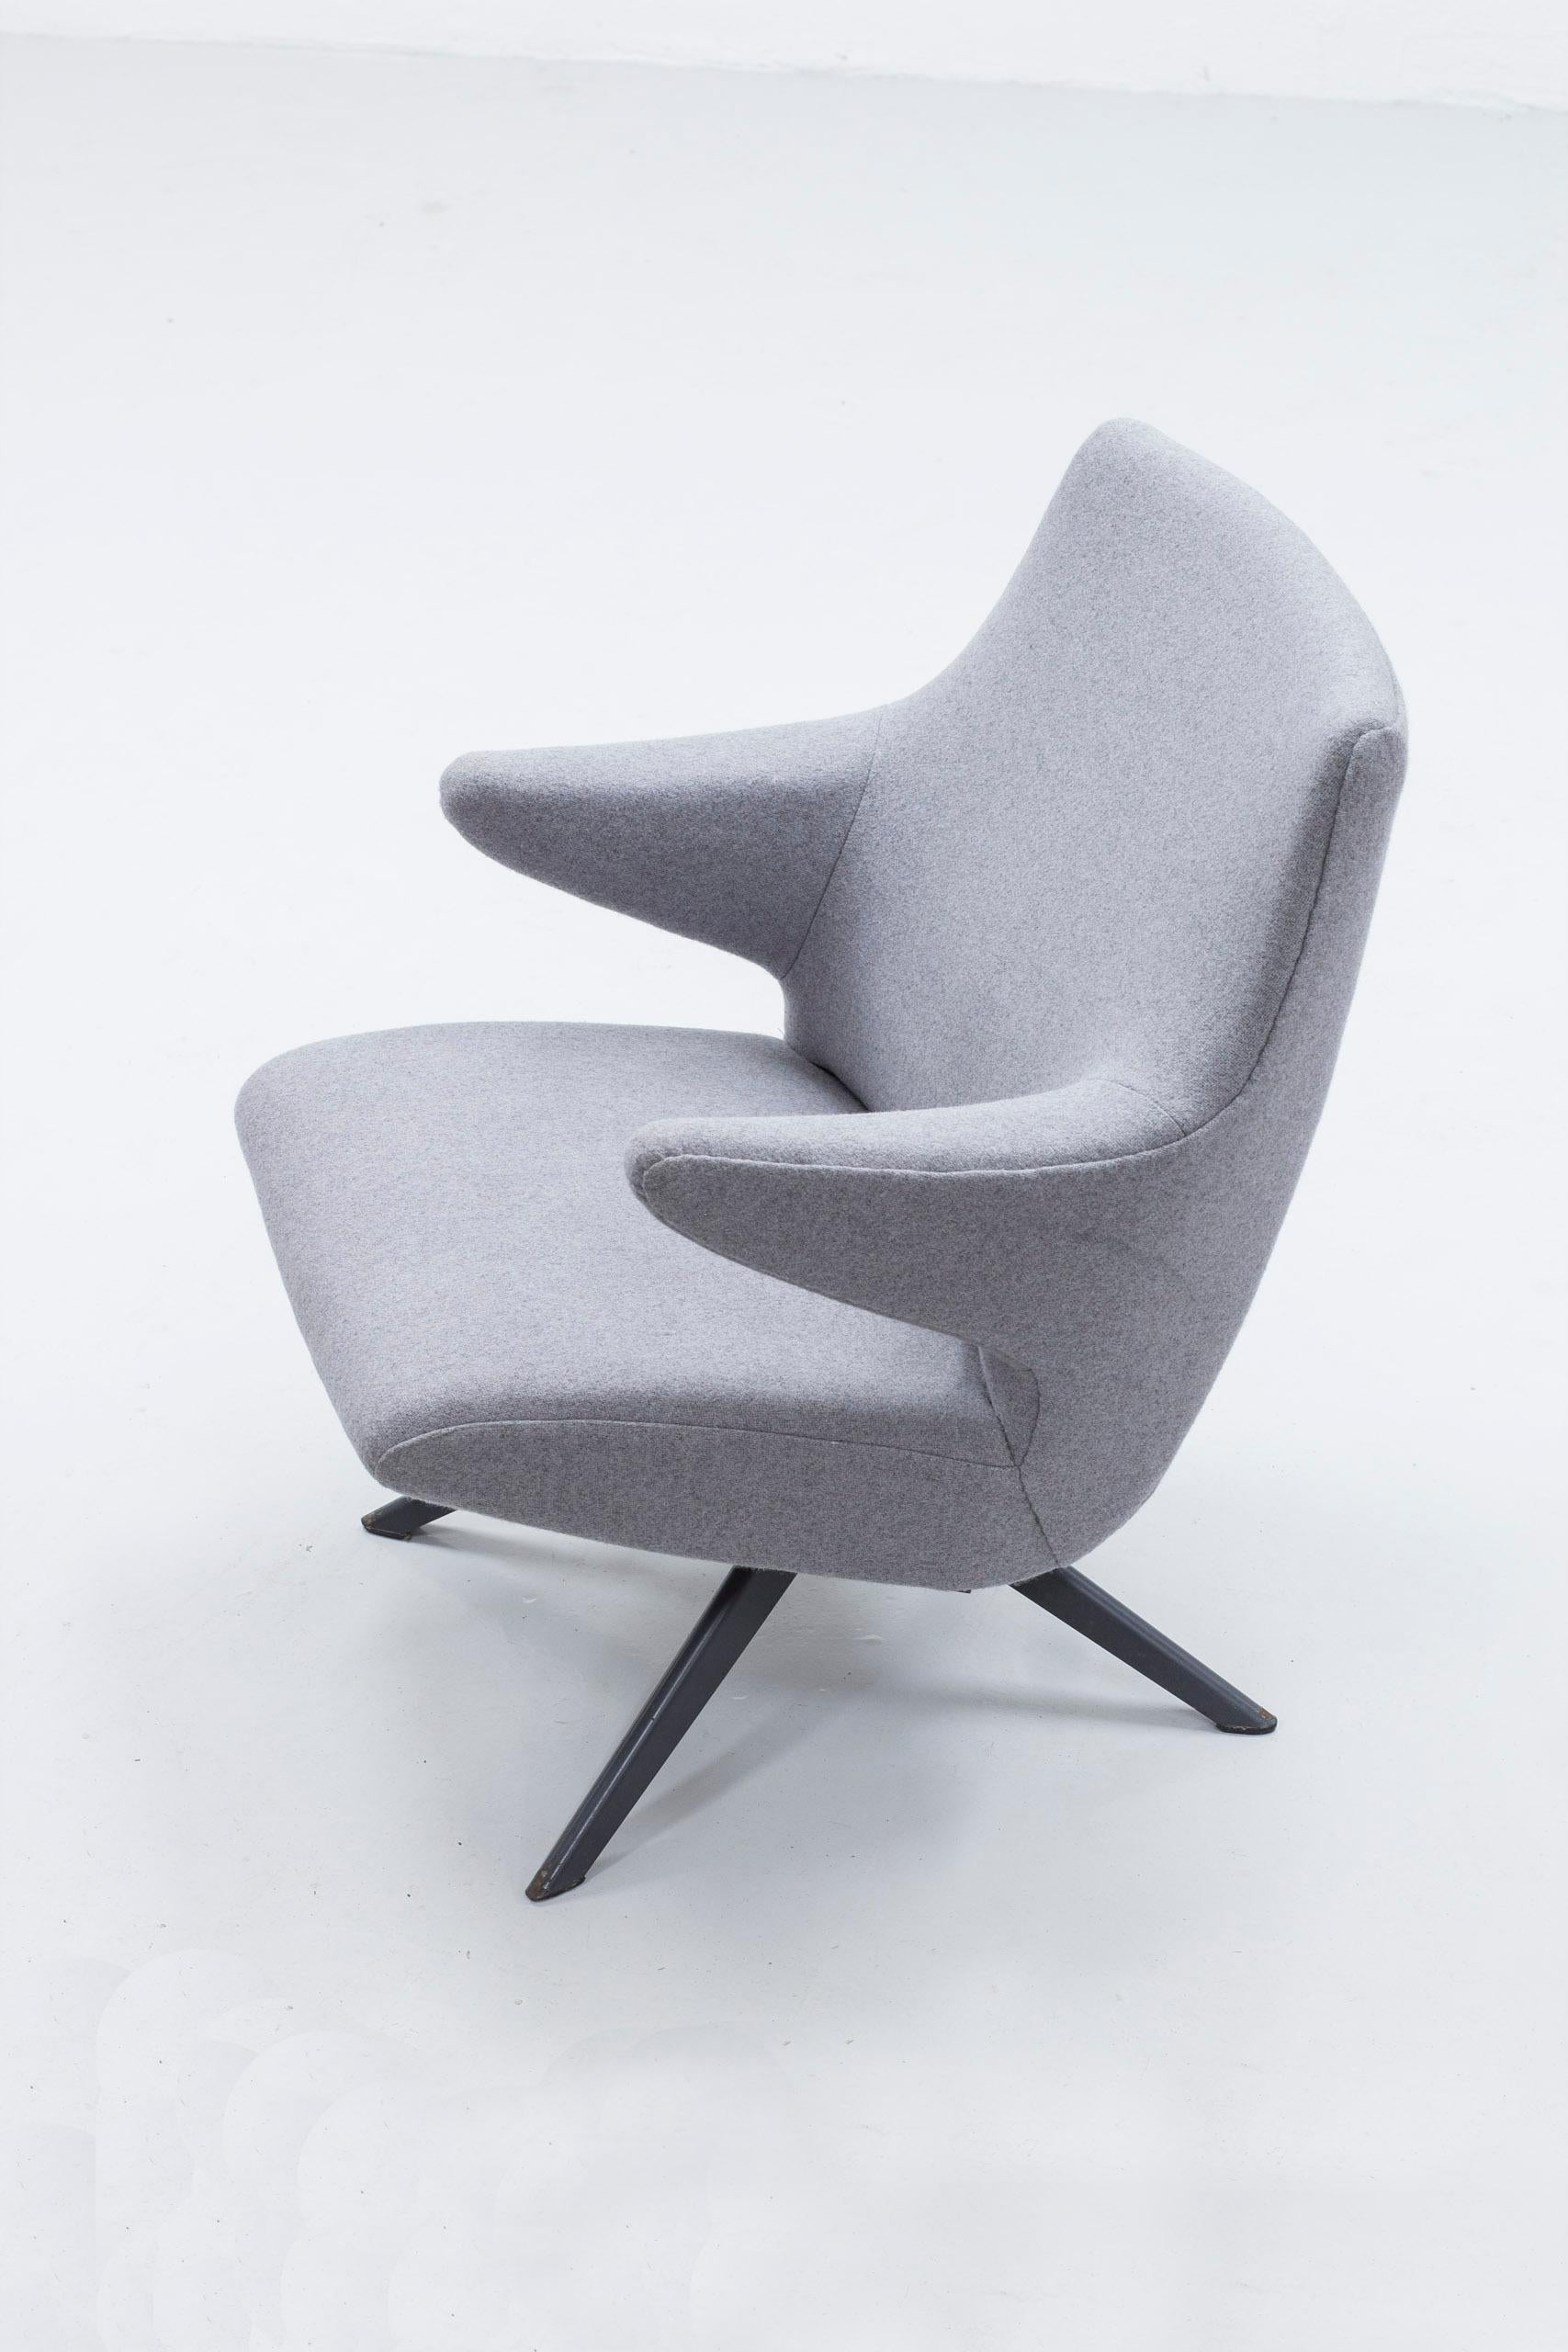 Rare lounge chair model 564-034 designed by Bengt Ruda. Produced by Nordiska Kompaniet, NK, for the 